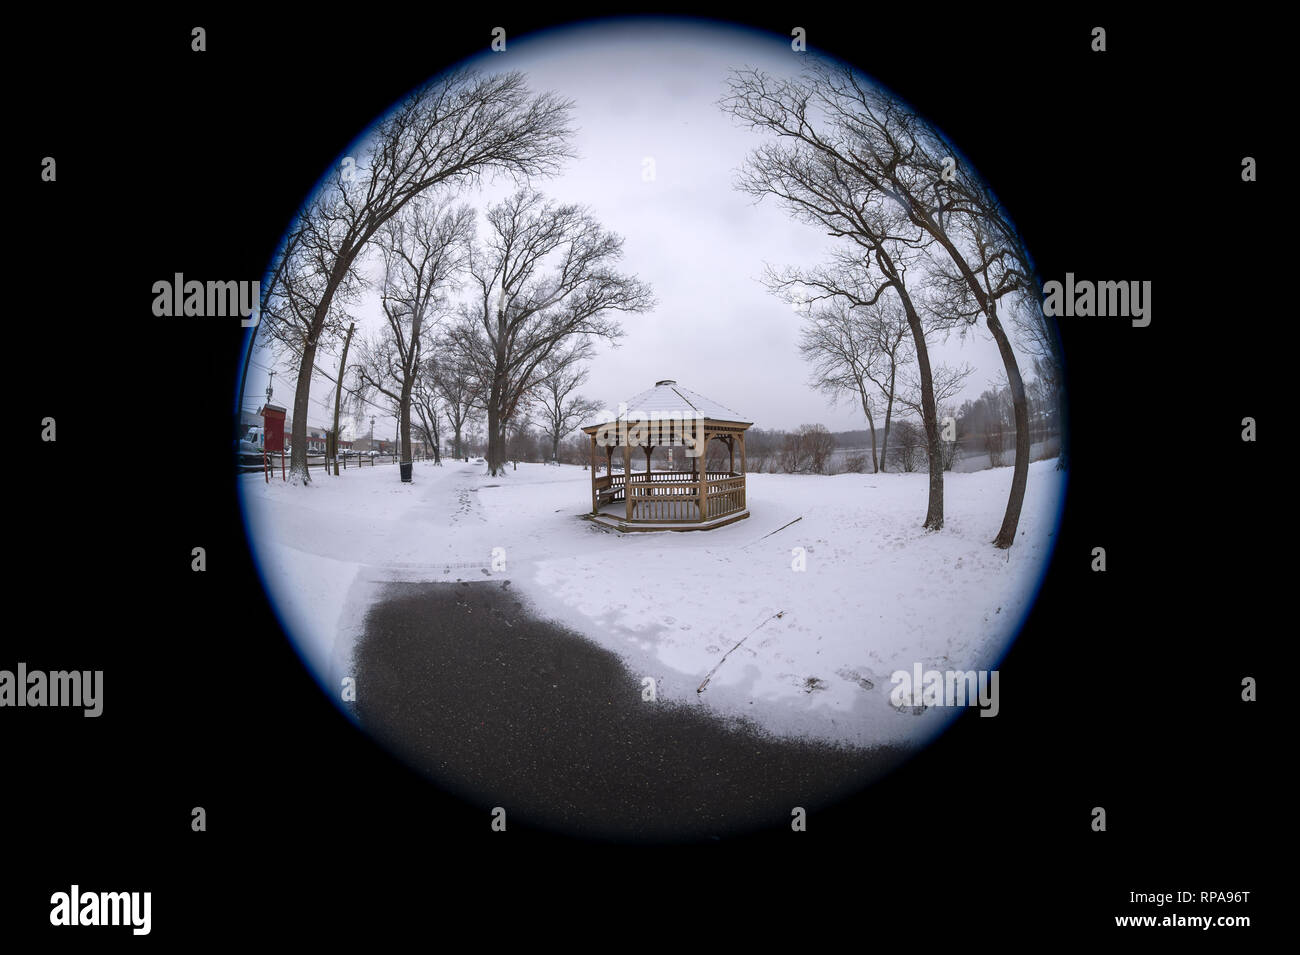 Long Island, New York, USA. 20th Feb, 2019. Snow falls at Mill Pond Park, with path partly plowed clear leading to wood gazebo and bare trees, on Long Island. 180 degree fisheye view of Nassau County public park. Credit: Ann E Parry/Alamy Live News Stock Photo